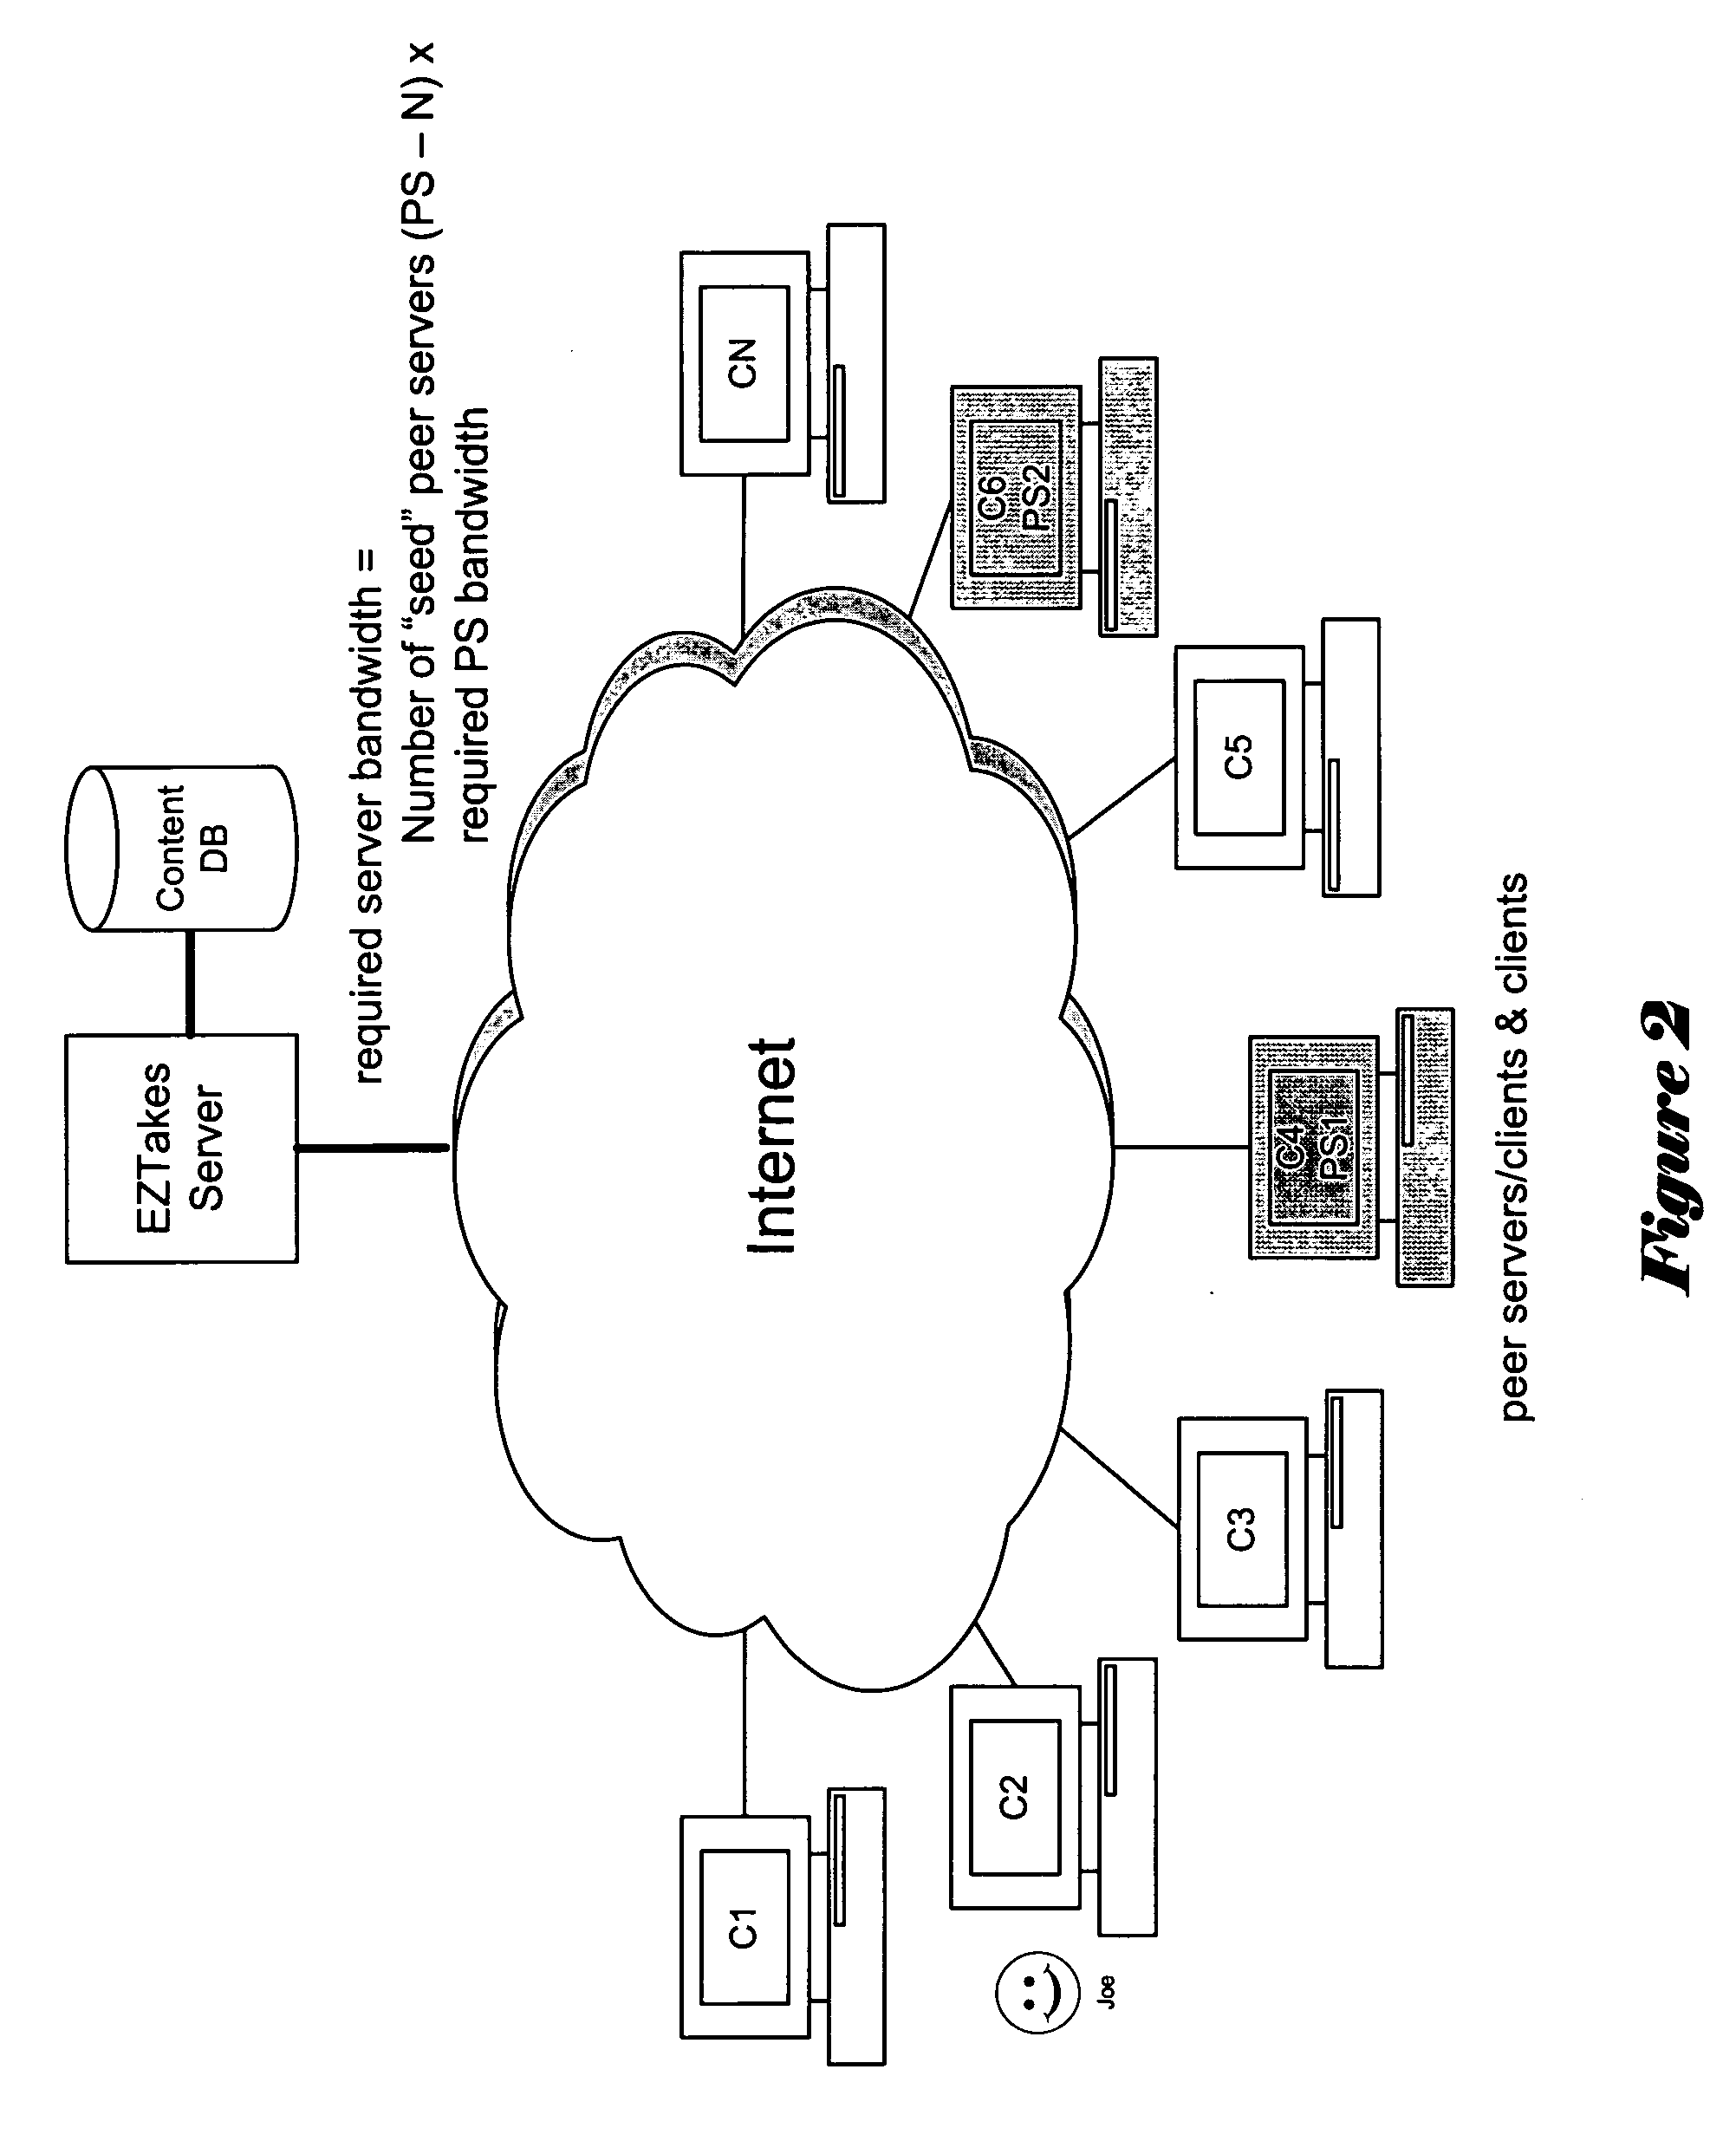 Content distribution using CD/DVD burners, high speed interconnects, and a burn and return policy